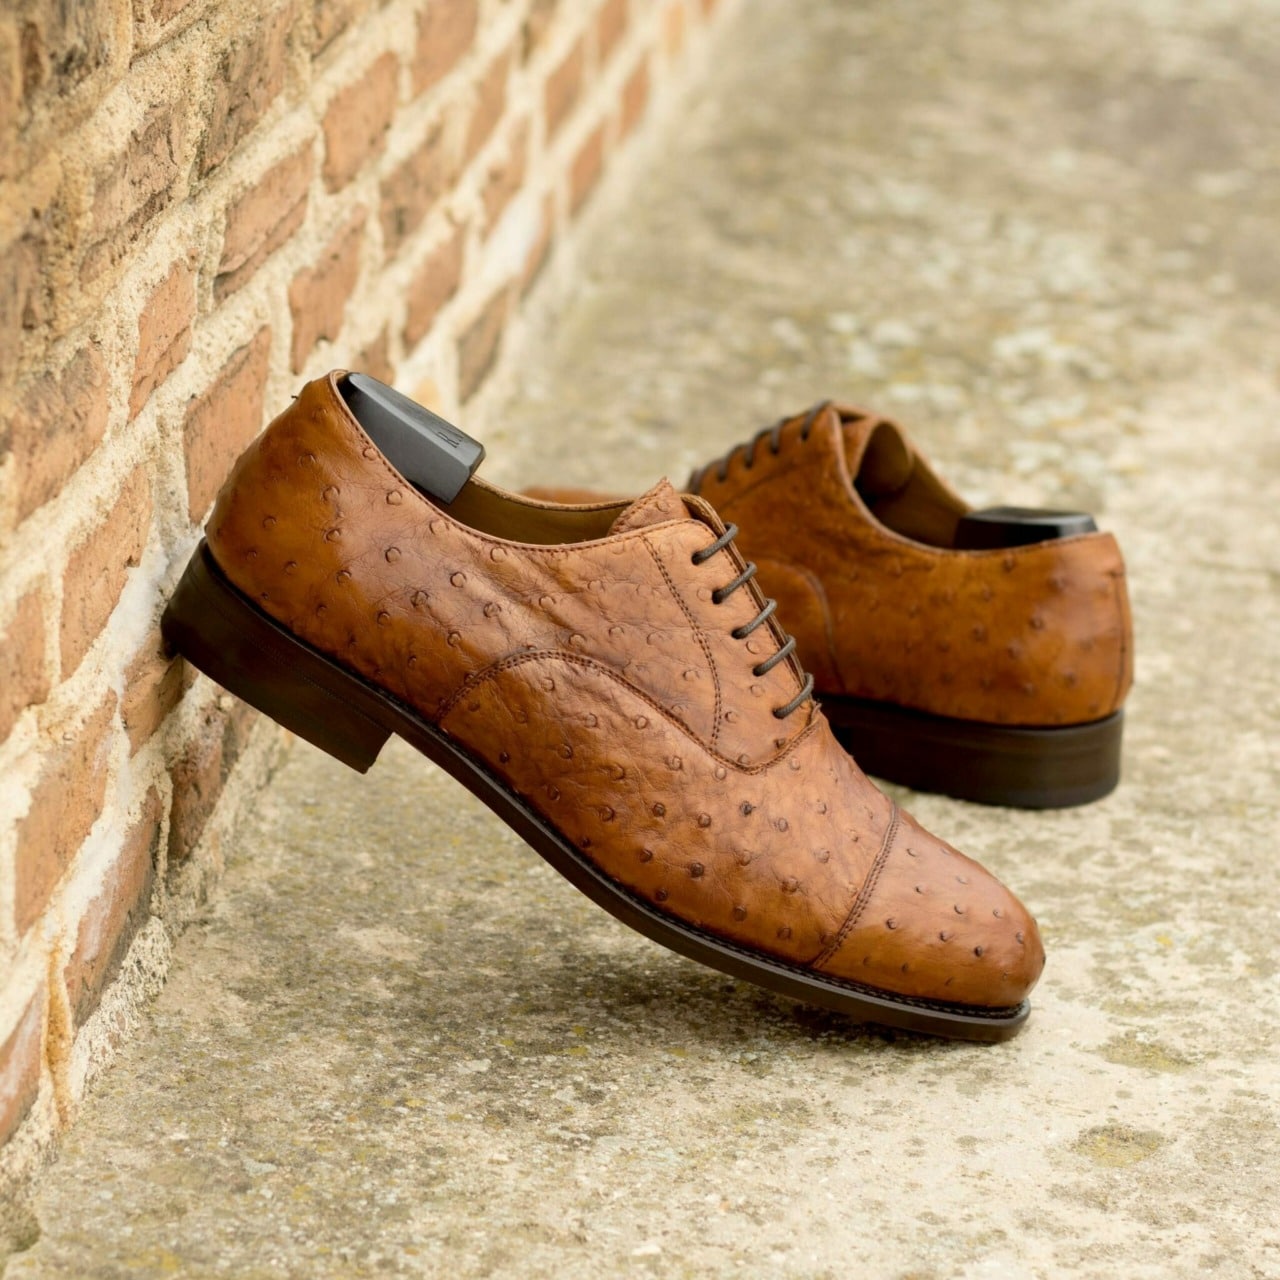 Introducing The Belmont Ave. Oxford: A Masterpiece of Craftsmanship from Robert August